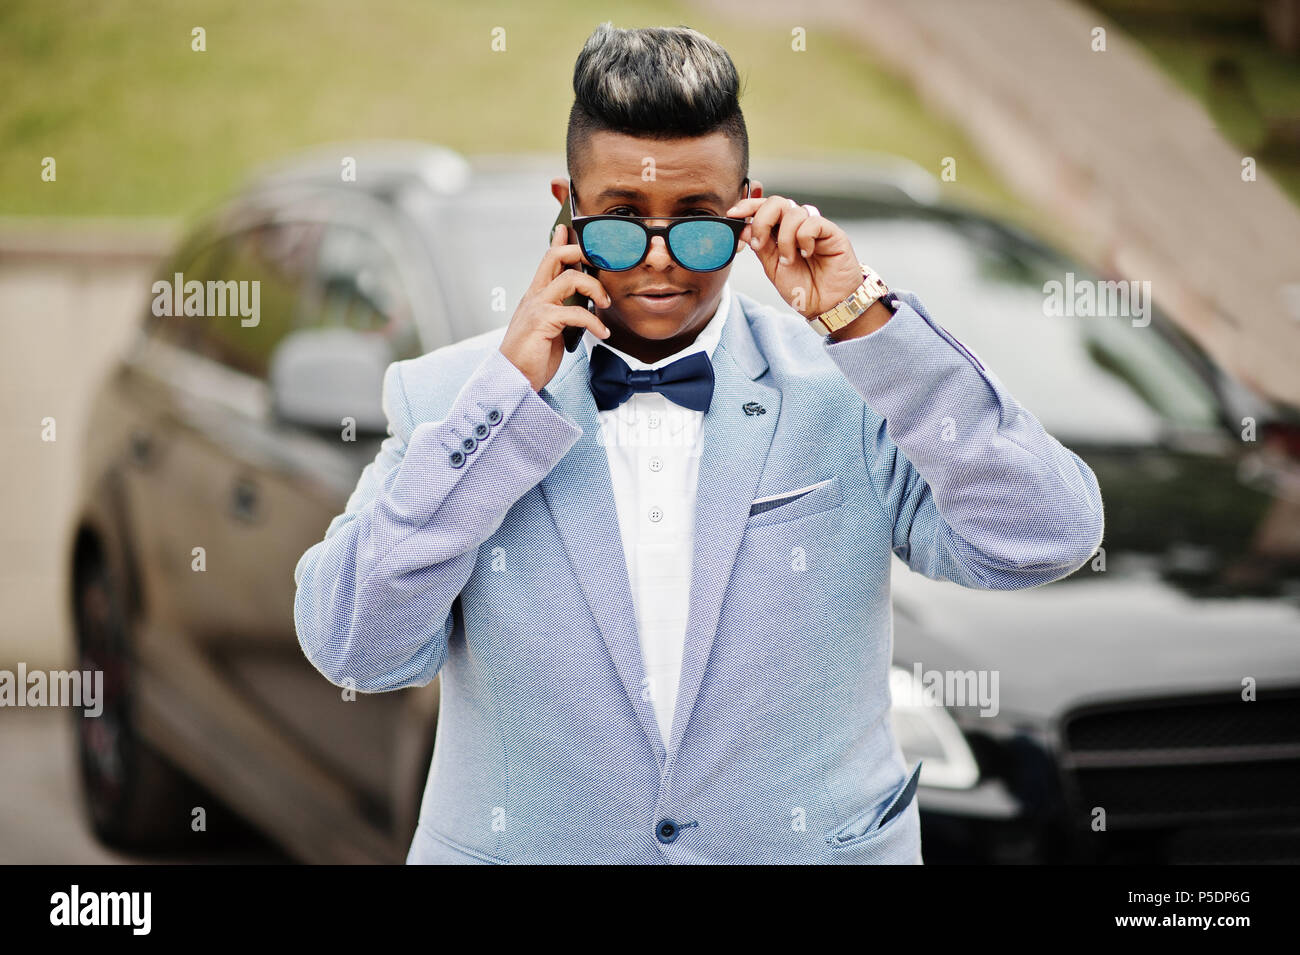 Stylish arabian man in jacket, bow tie and sunglasses against black suv  car. Arab rich businessman speaking on mobile phone Stock Photo - Alamy